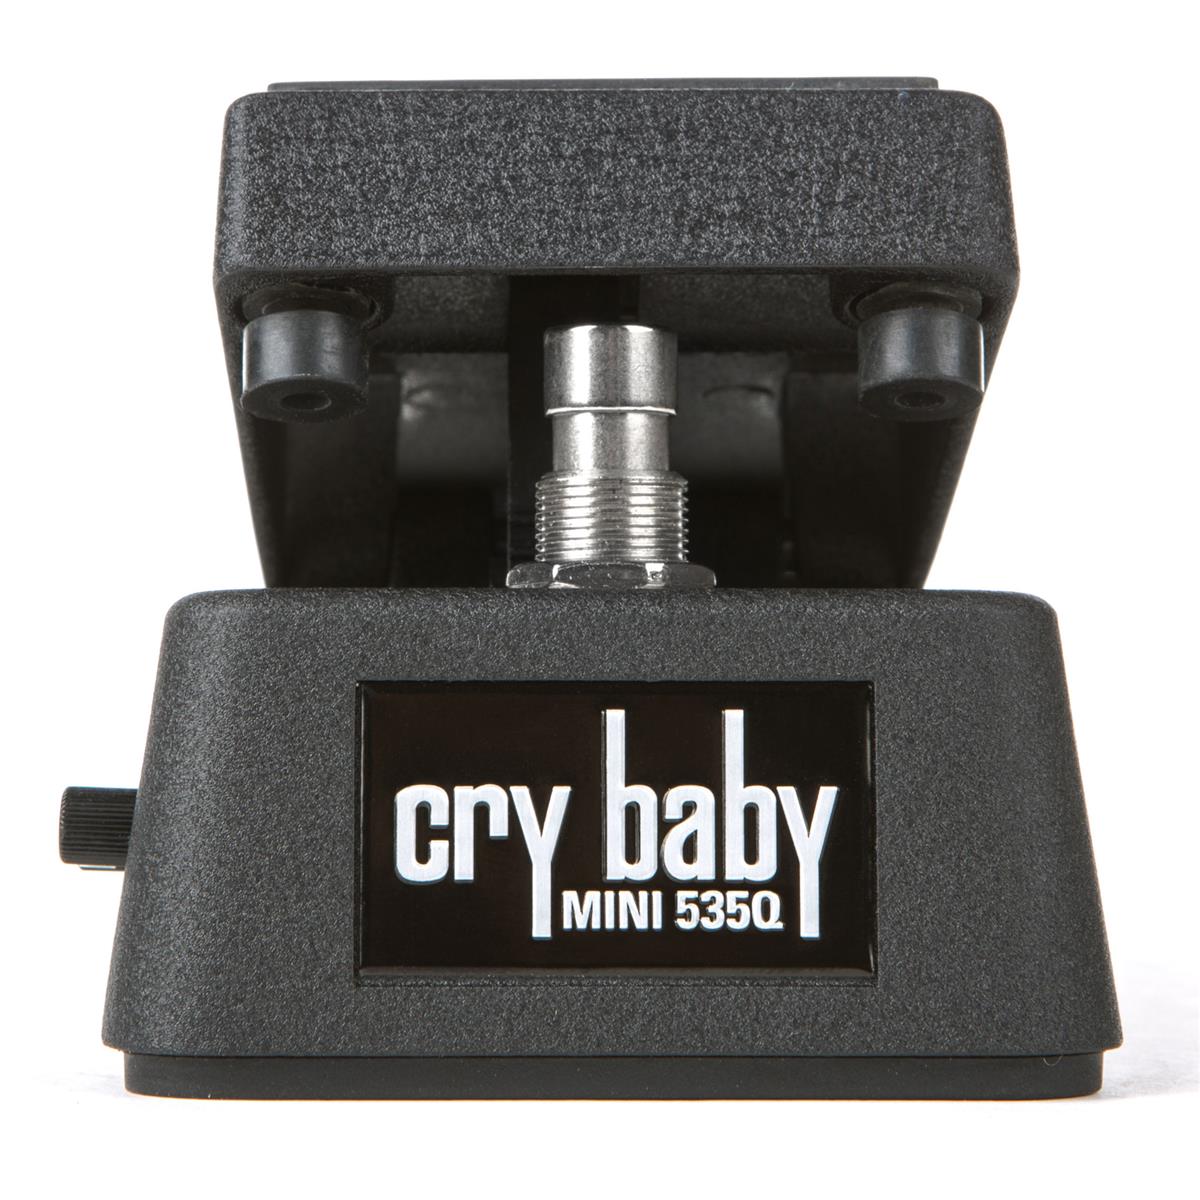 Image of Dunlop Cry Baby Mini 535Q Wah Pedal